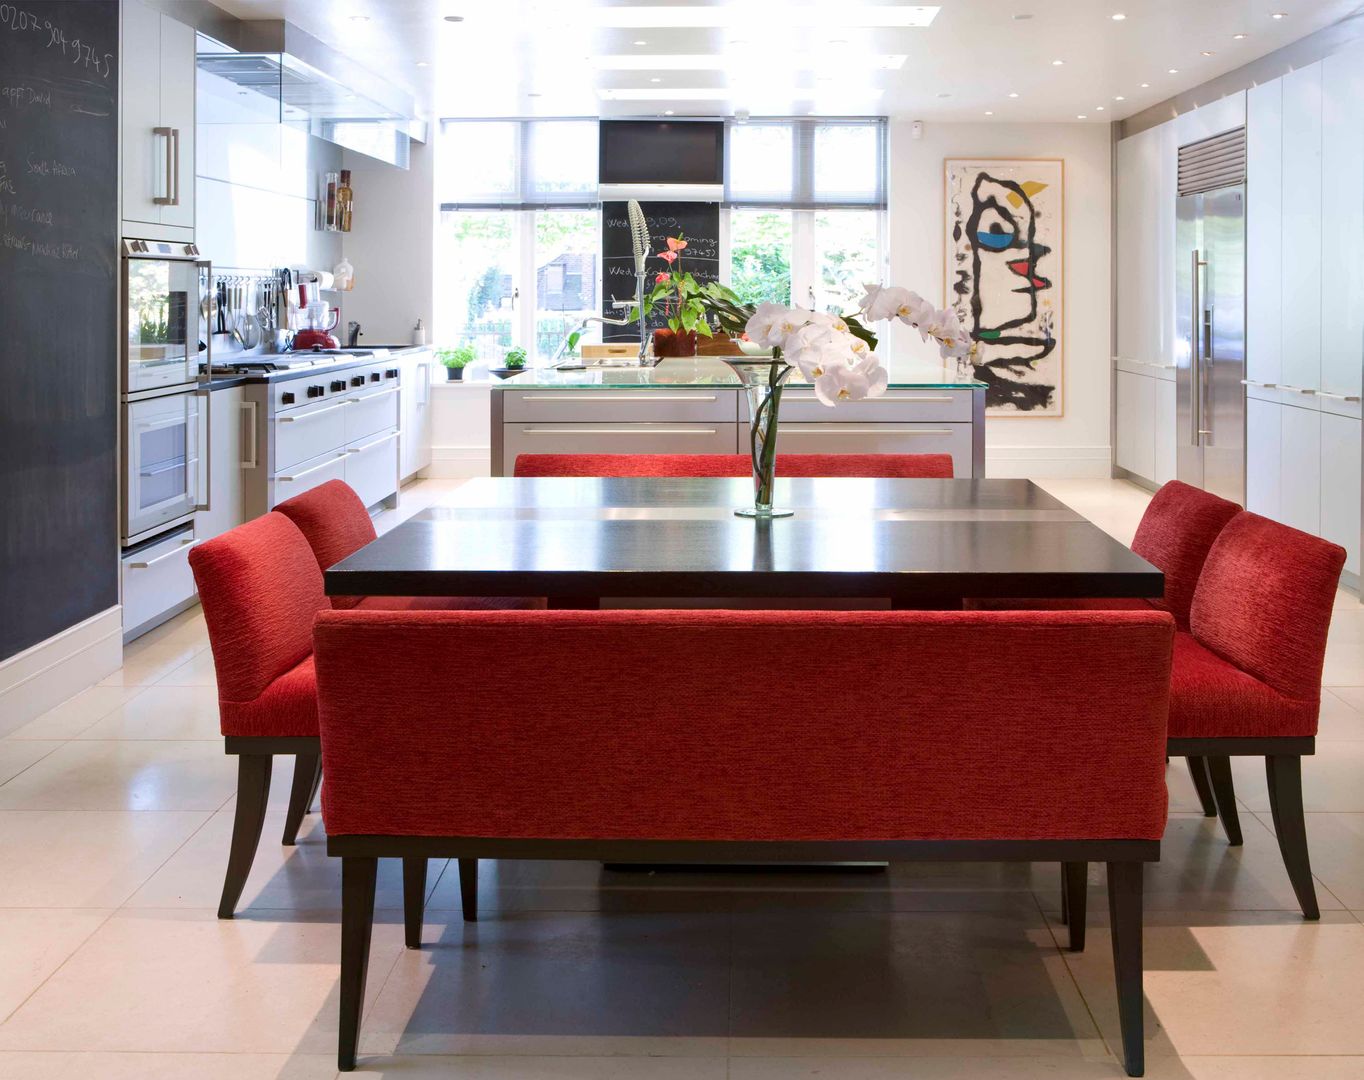 KSR Architects | Compton Avenue | Dining room homify Comedores modernos